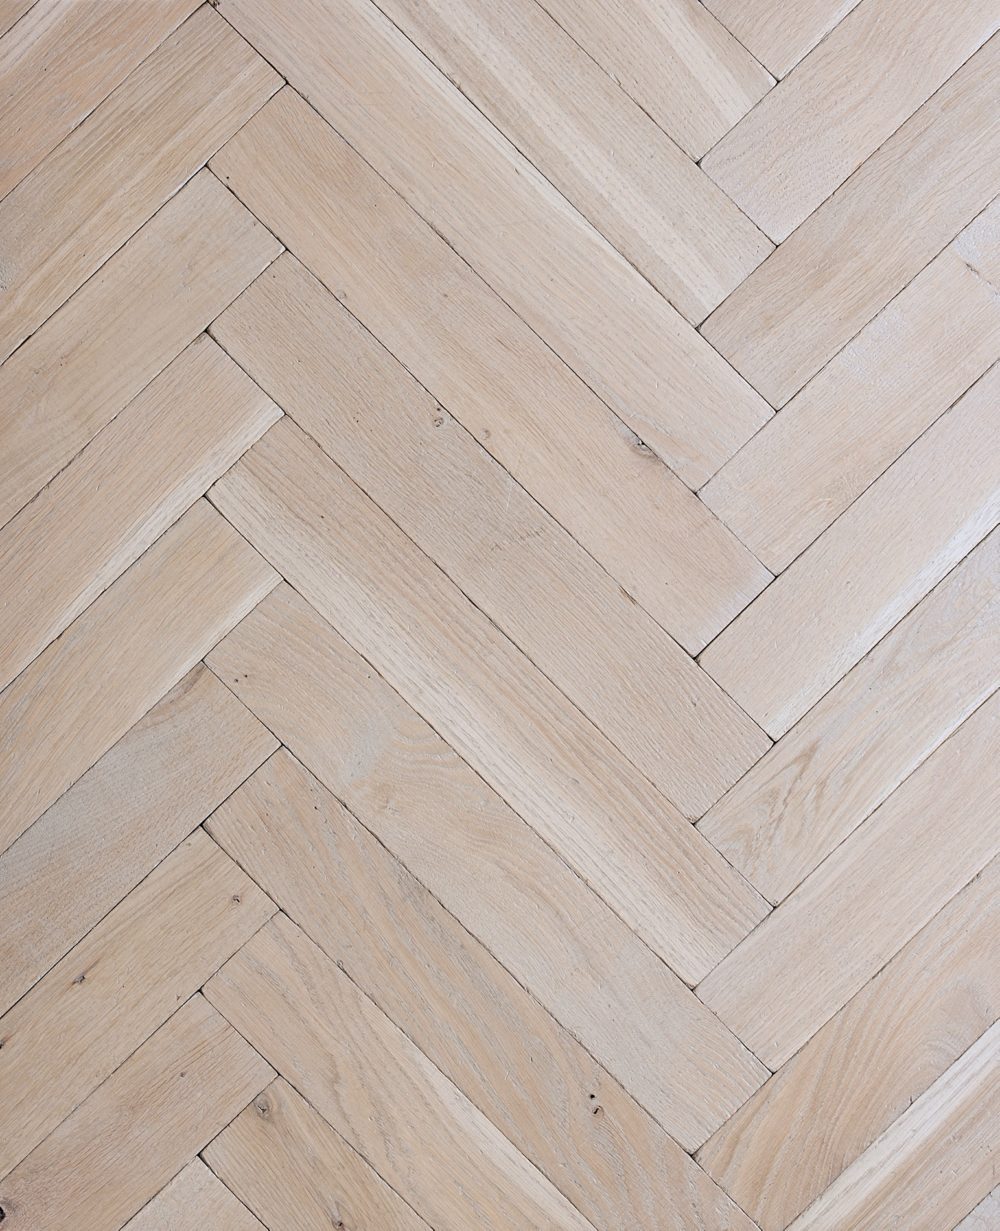 Beige Oak-Parquet-Solid-Distressed-Rustic-Oiled